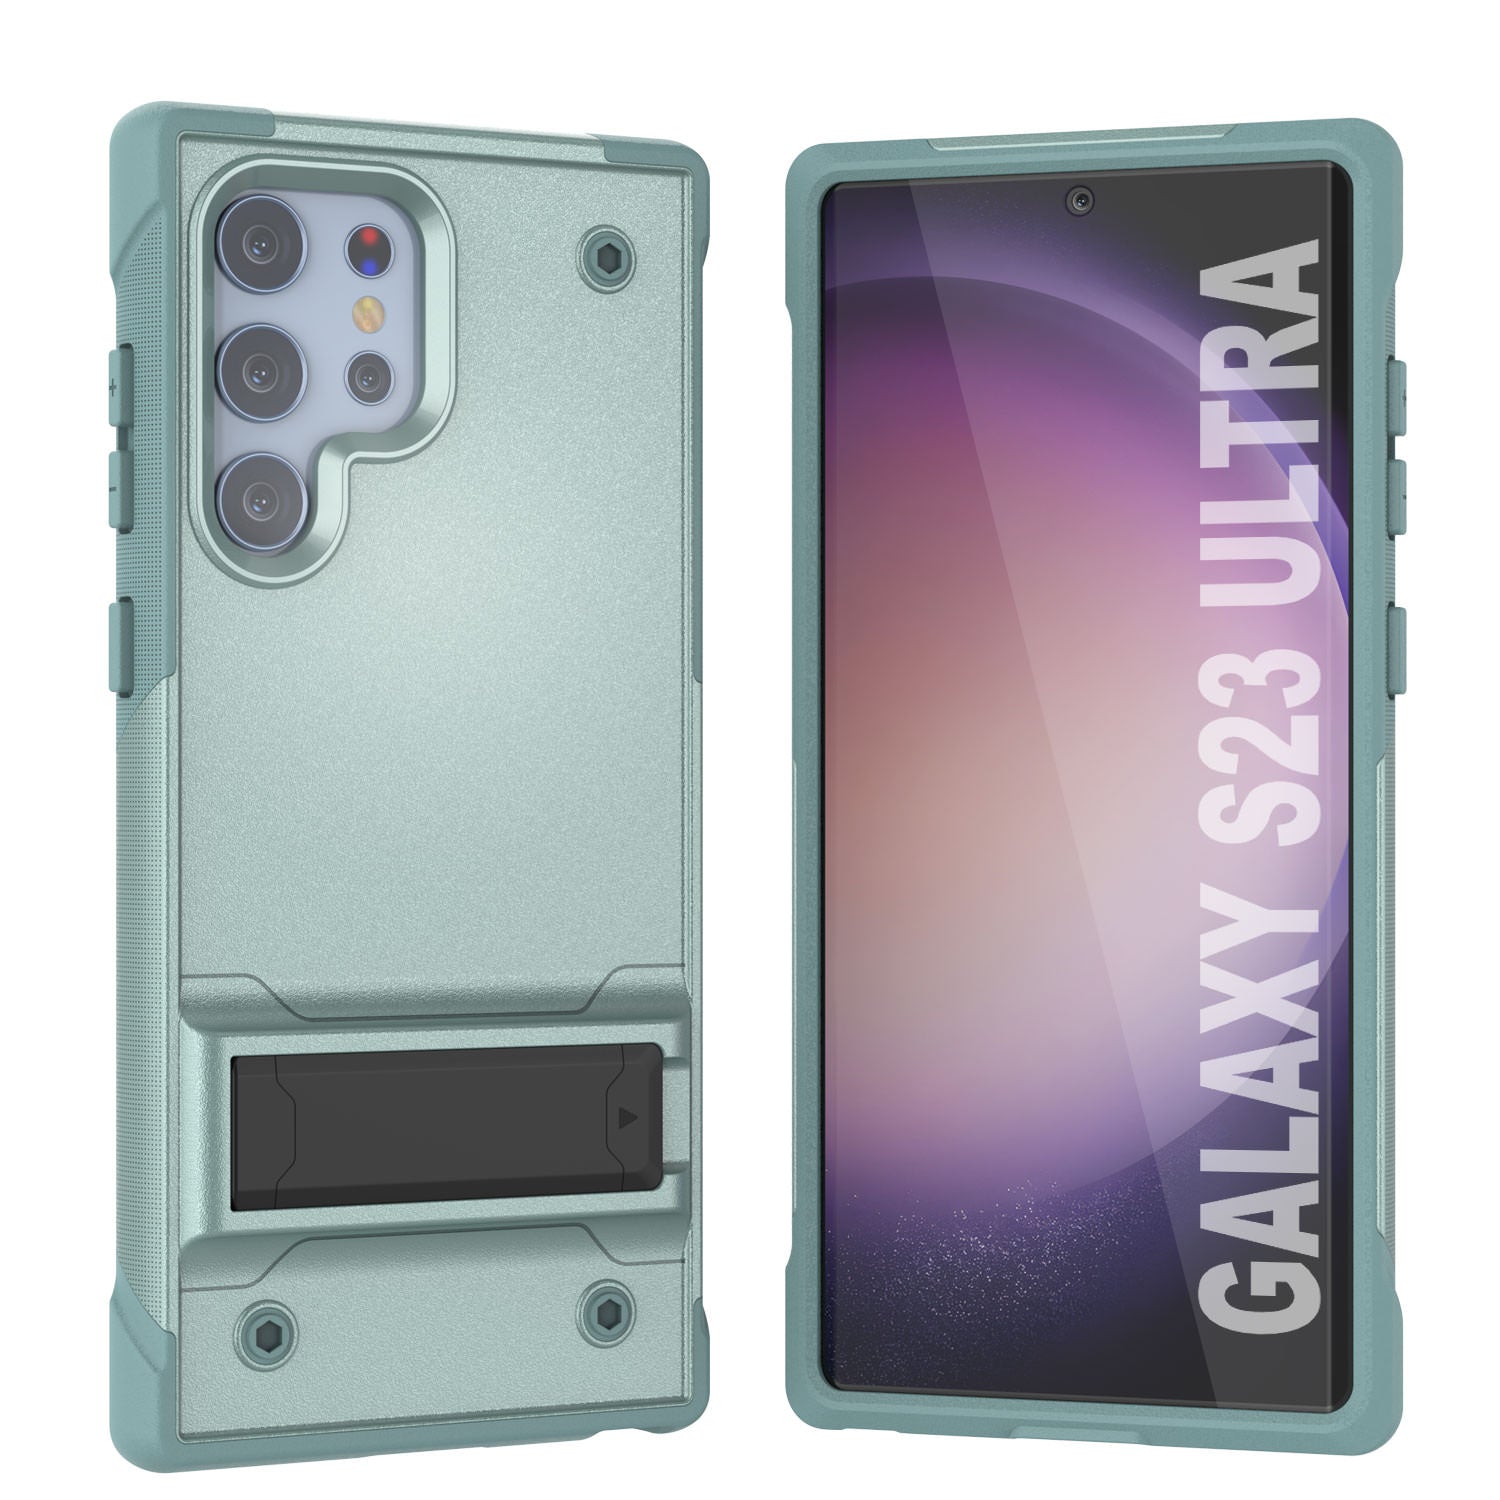 Punkcase Galaxy S24 Ultra Case [Reliance Series] Protective Hybrid Military Grade Cover W/Built-in Kickstand [Green]